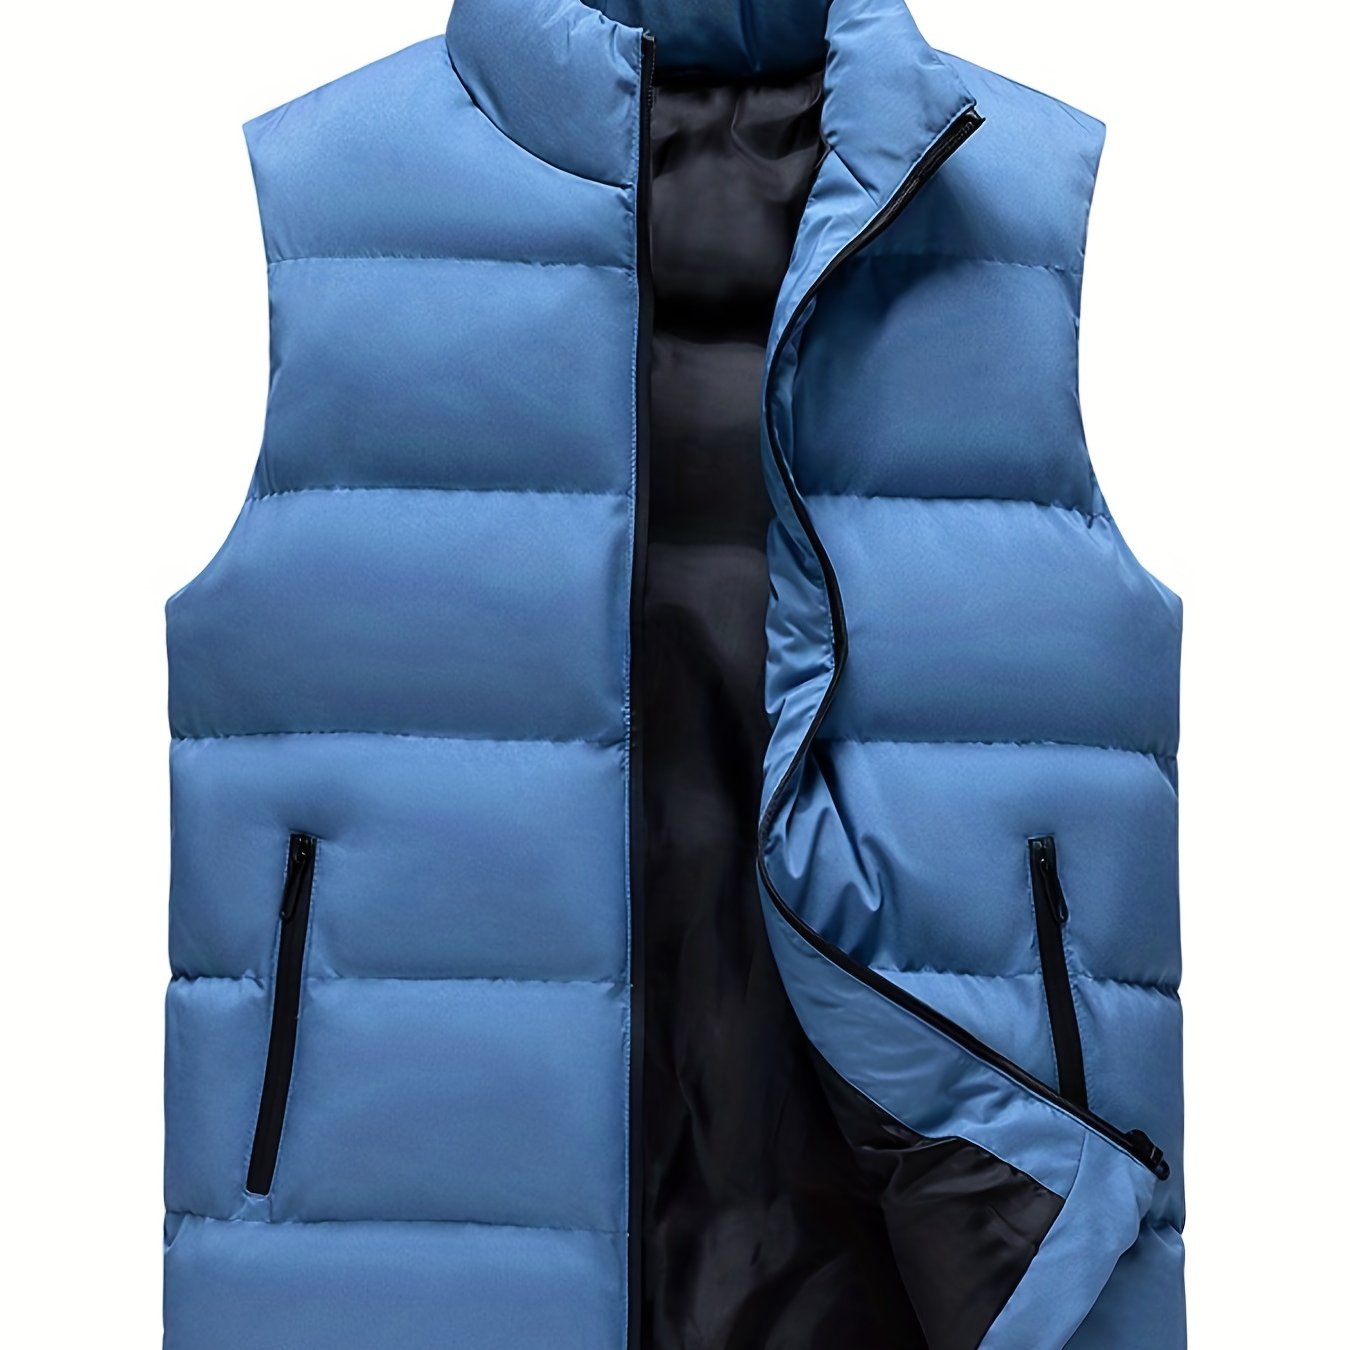 Men's Thermal Vest Sleeveless Jacket Trendy And Warm For Winter Autumn